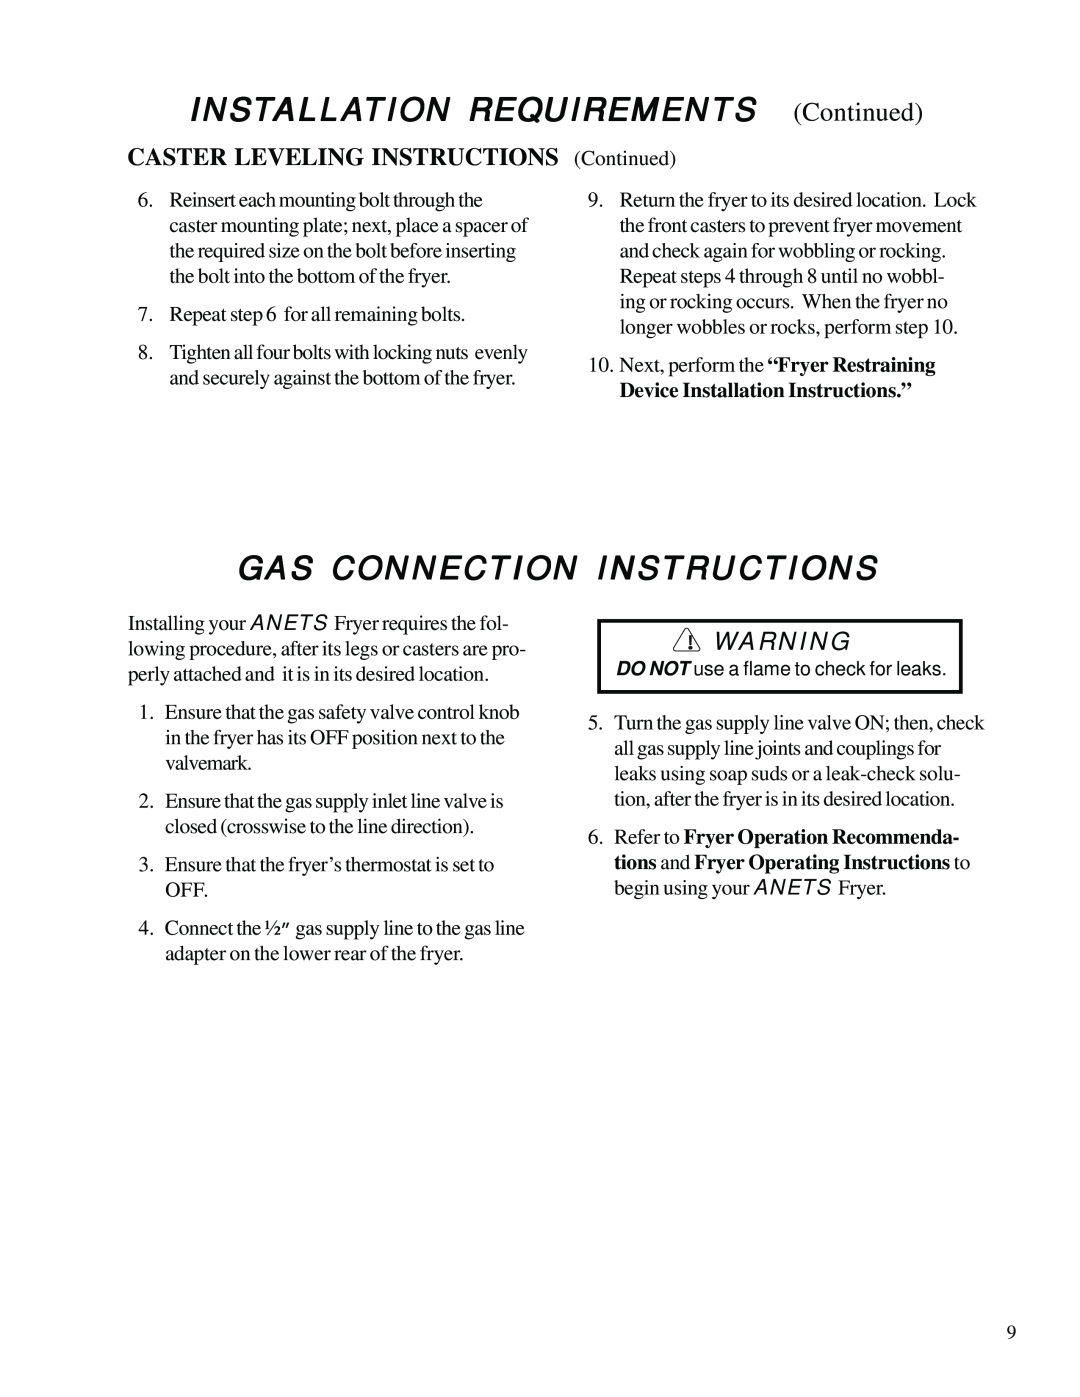 Anetsberger Brothers SLG40 Gas Connection Instructions, Caster Leveling Instructions, Device Installation Instructions.” 